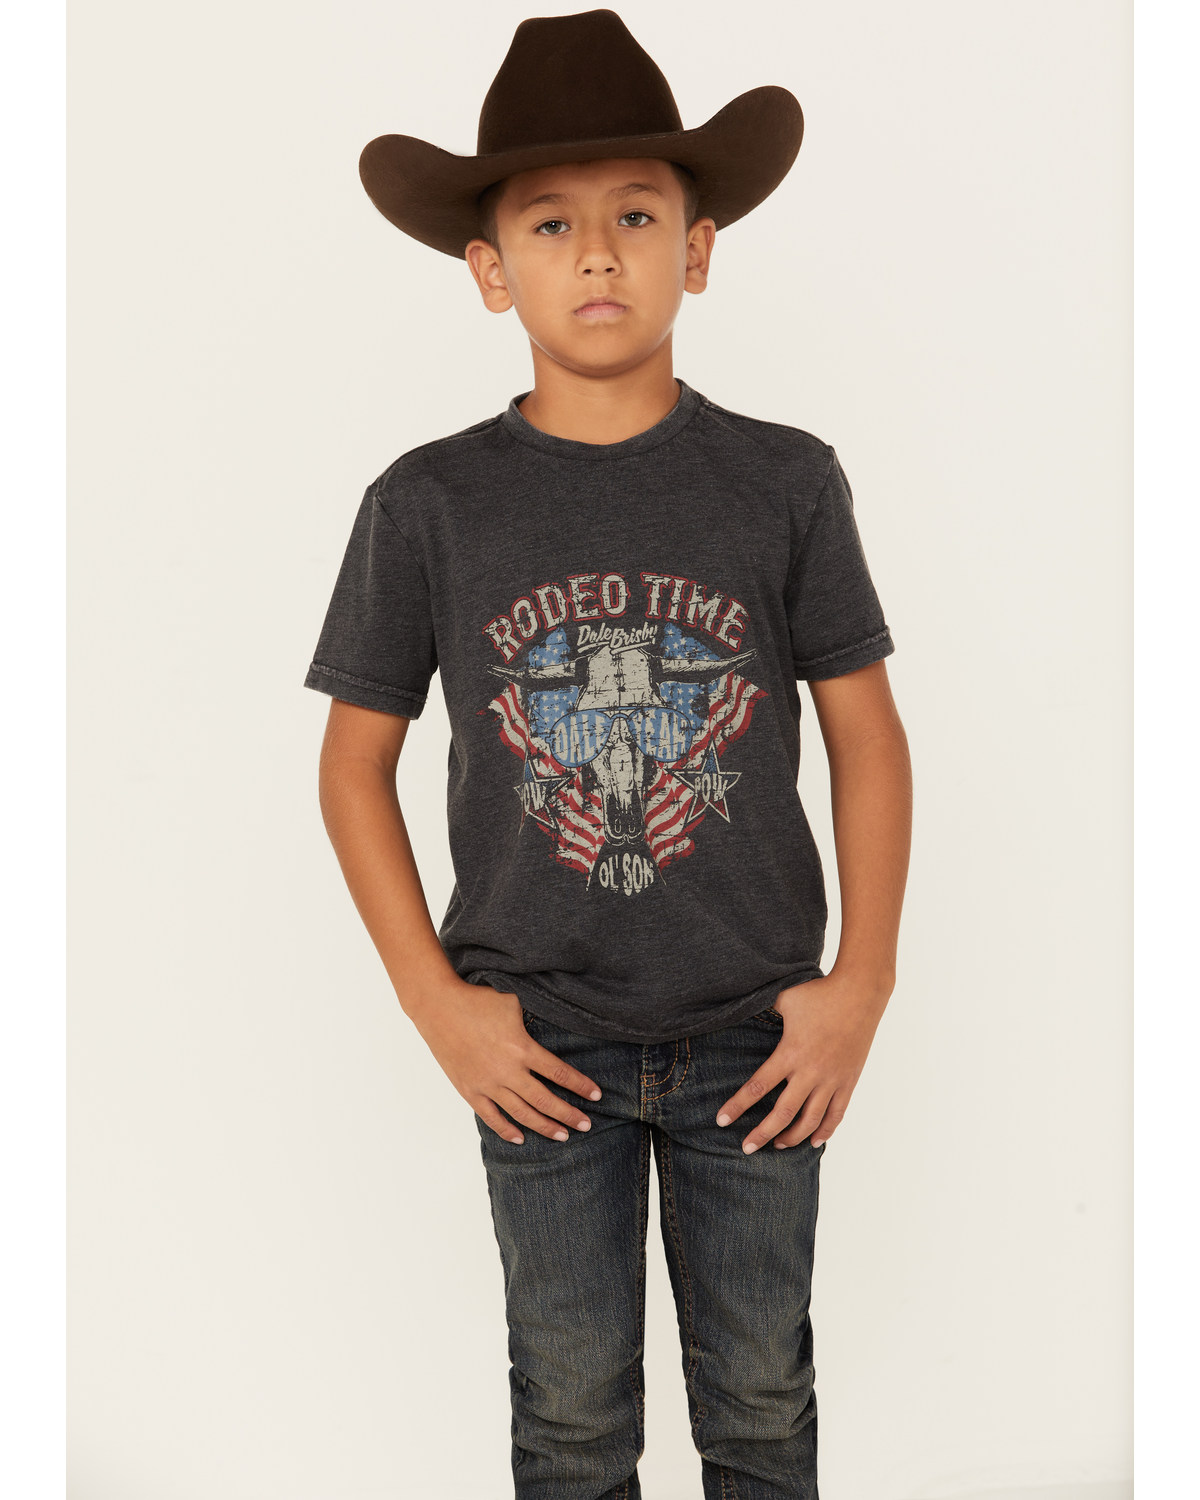 Rock & Roll Denim Boys' Dale Brisby American Rodeo Time Short Sleeve Graphic T-Shirt